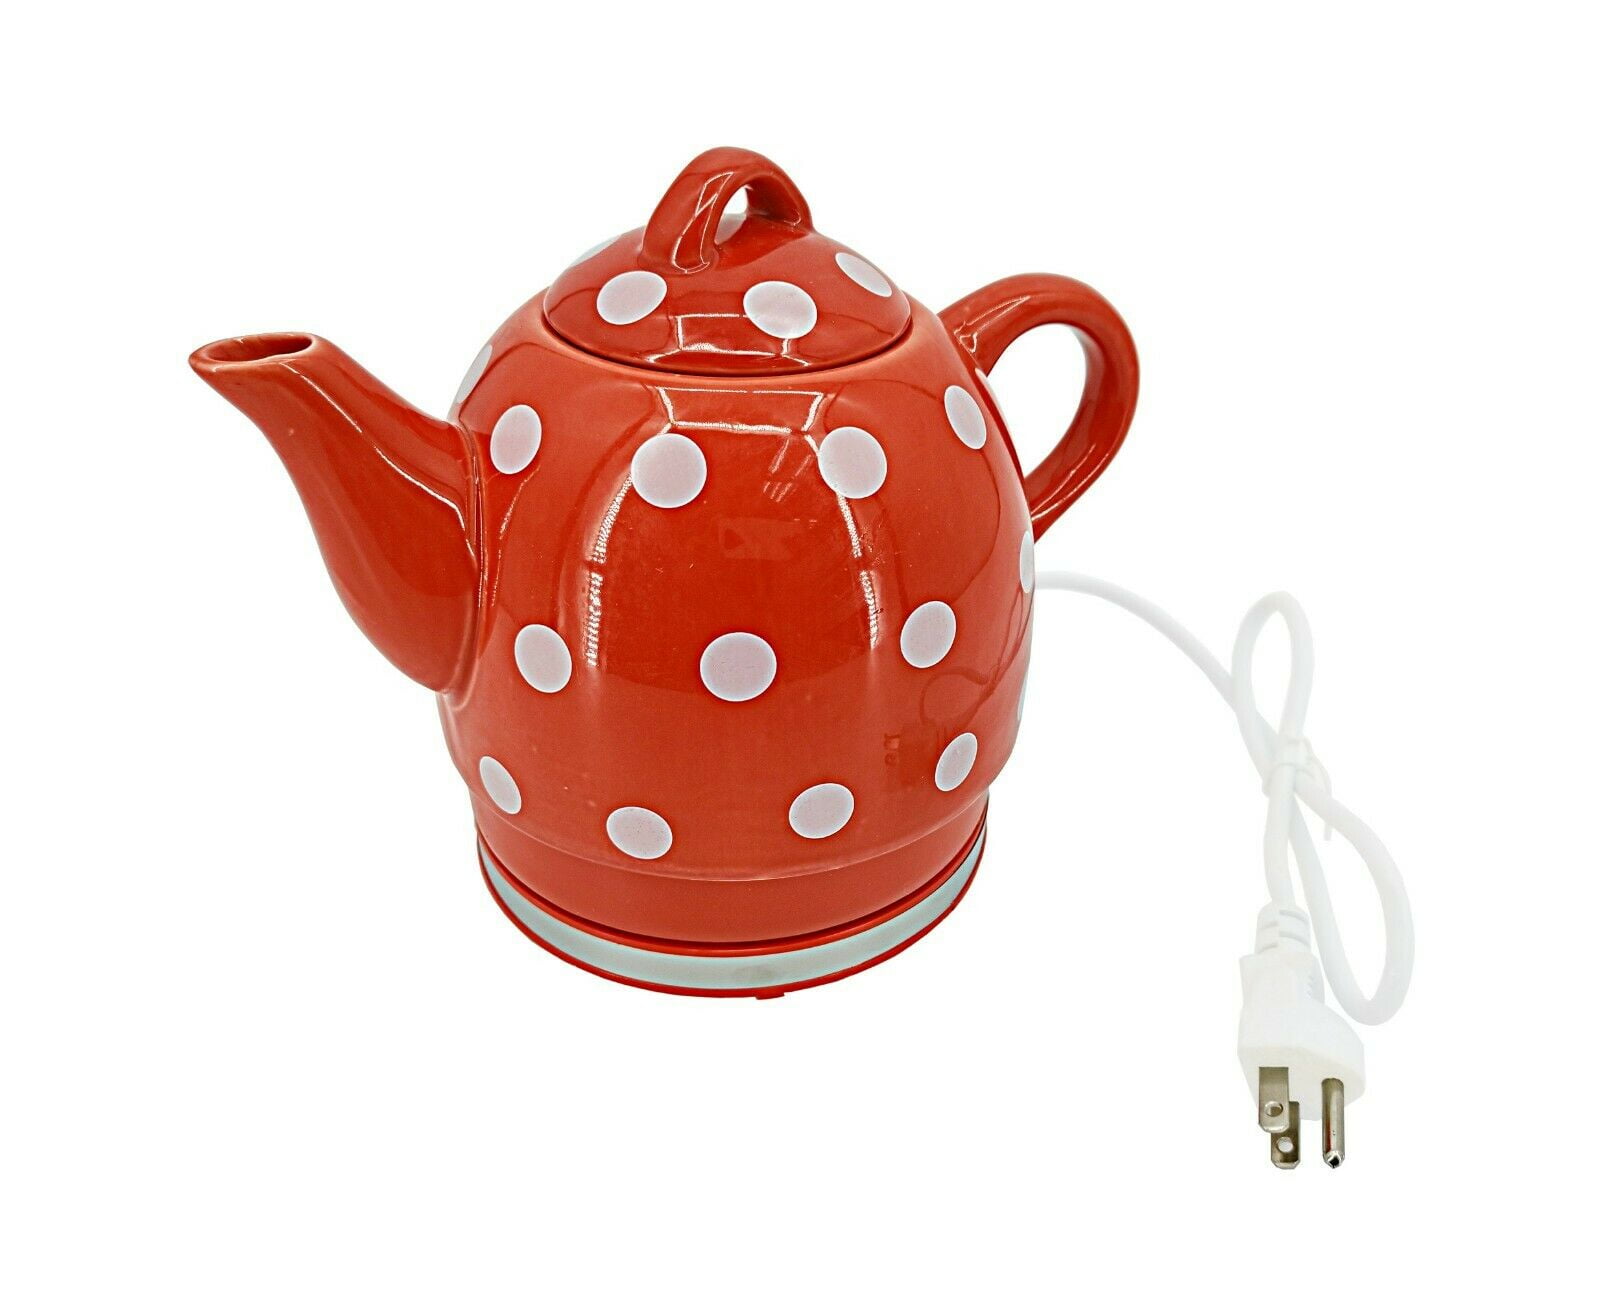 Noelle Pink Ceramic Electric Tea Kettle by Pinky Up - 1.5L